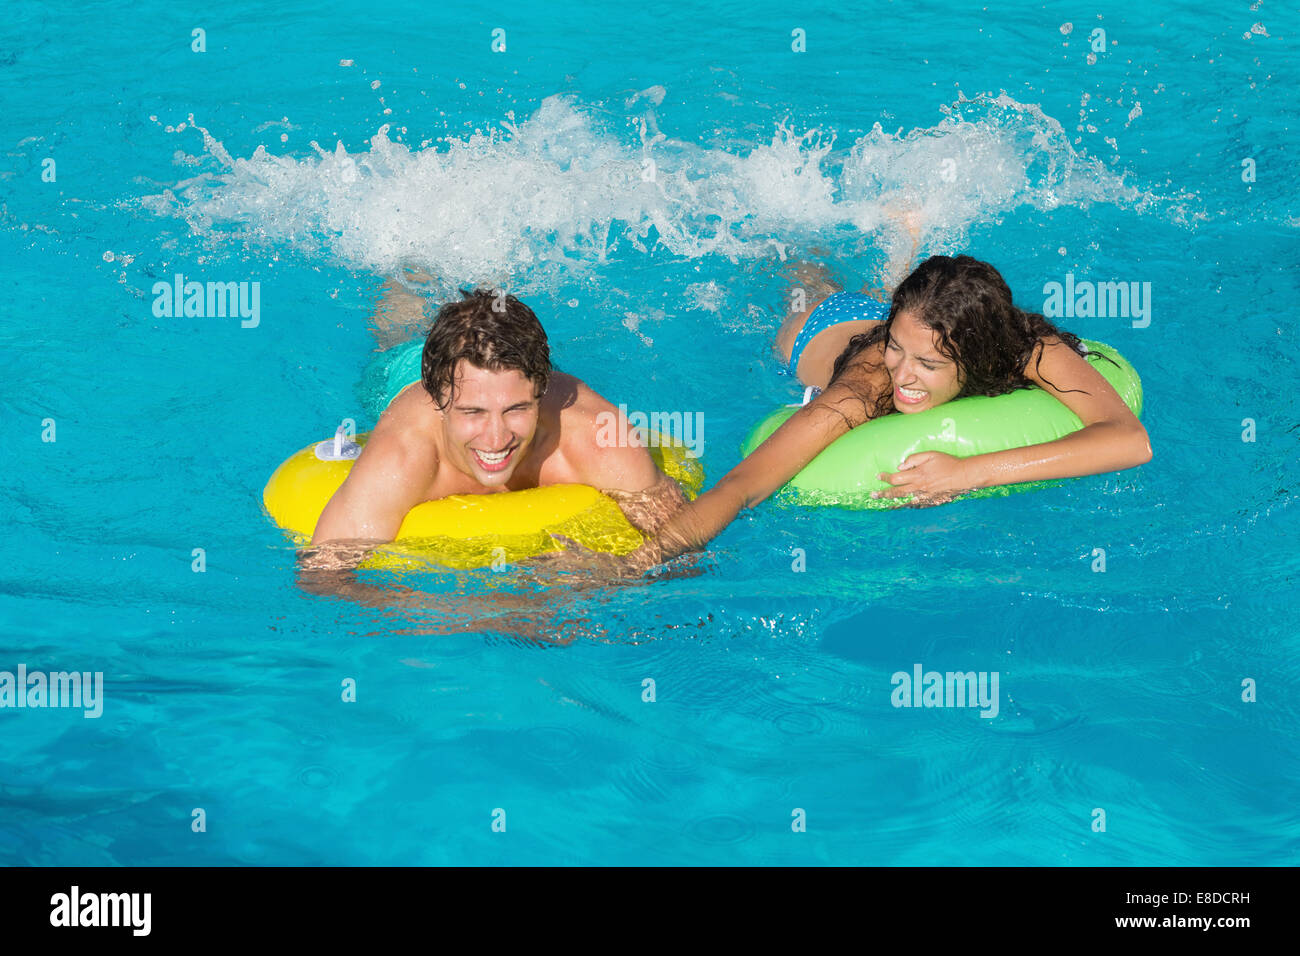 Couple in inflatable rings at swimming pool Stock Photo